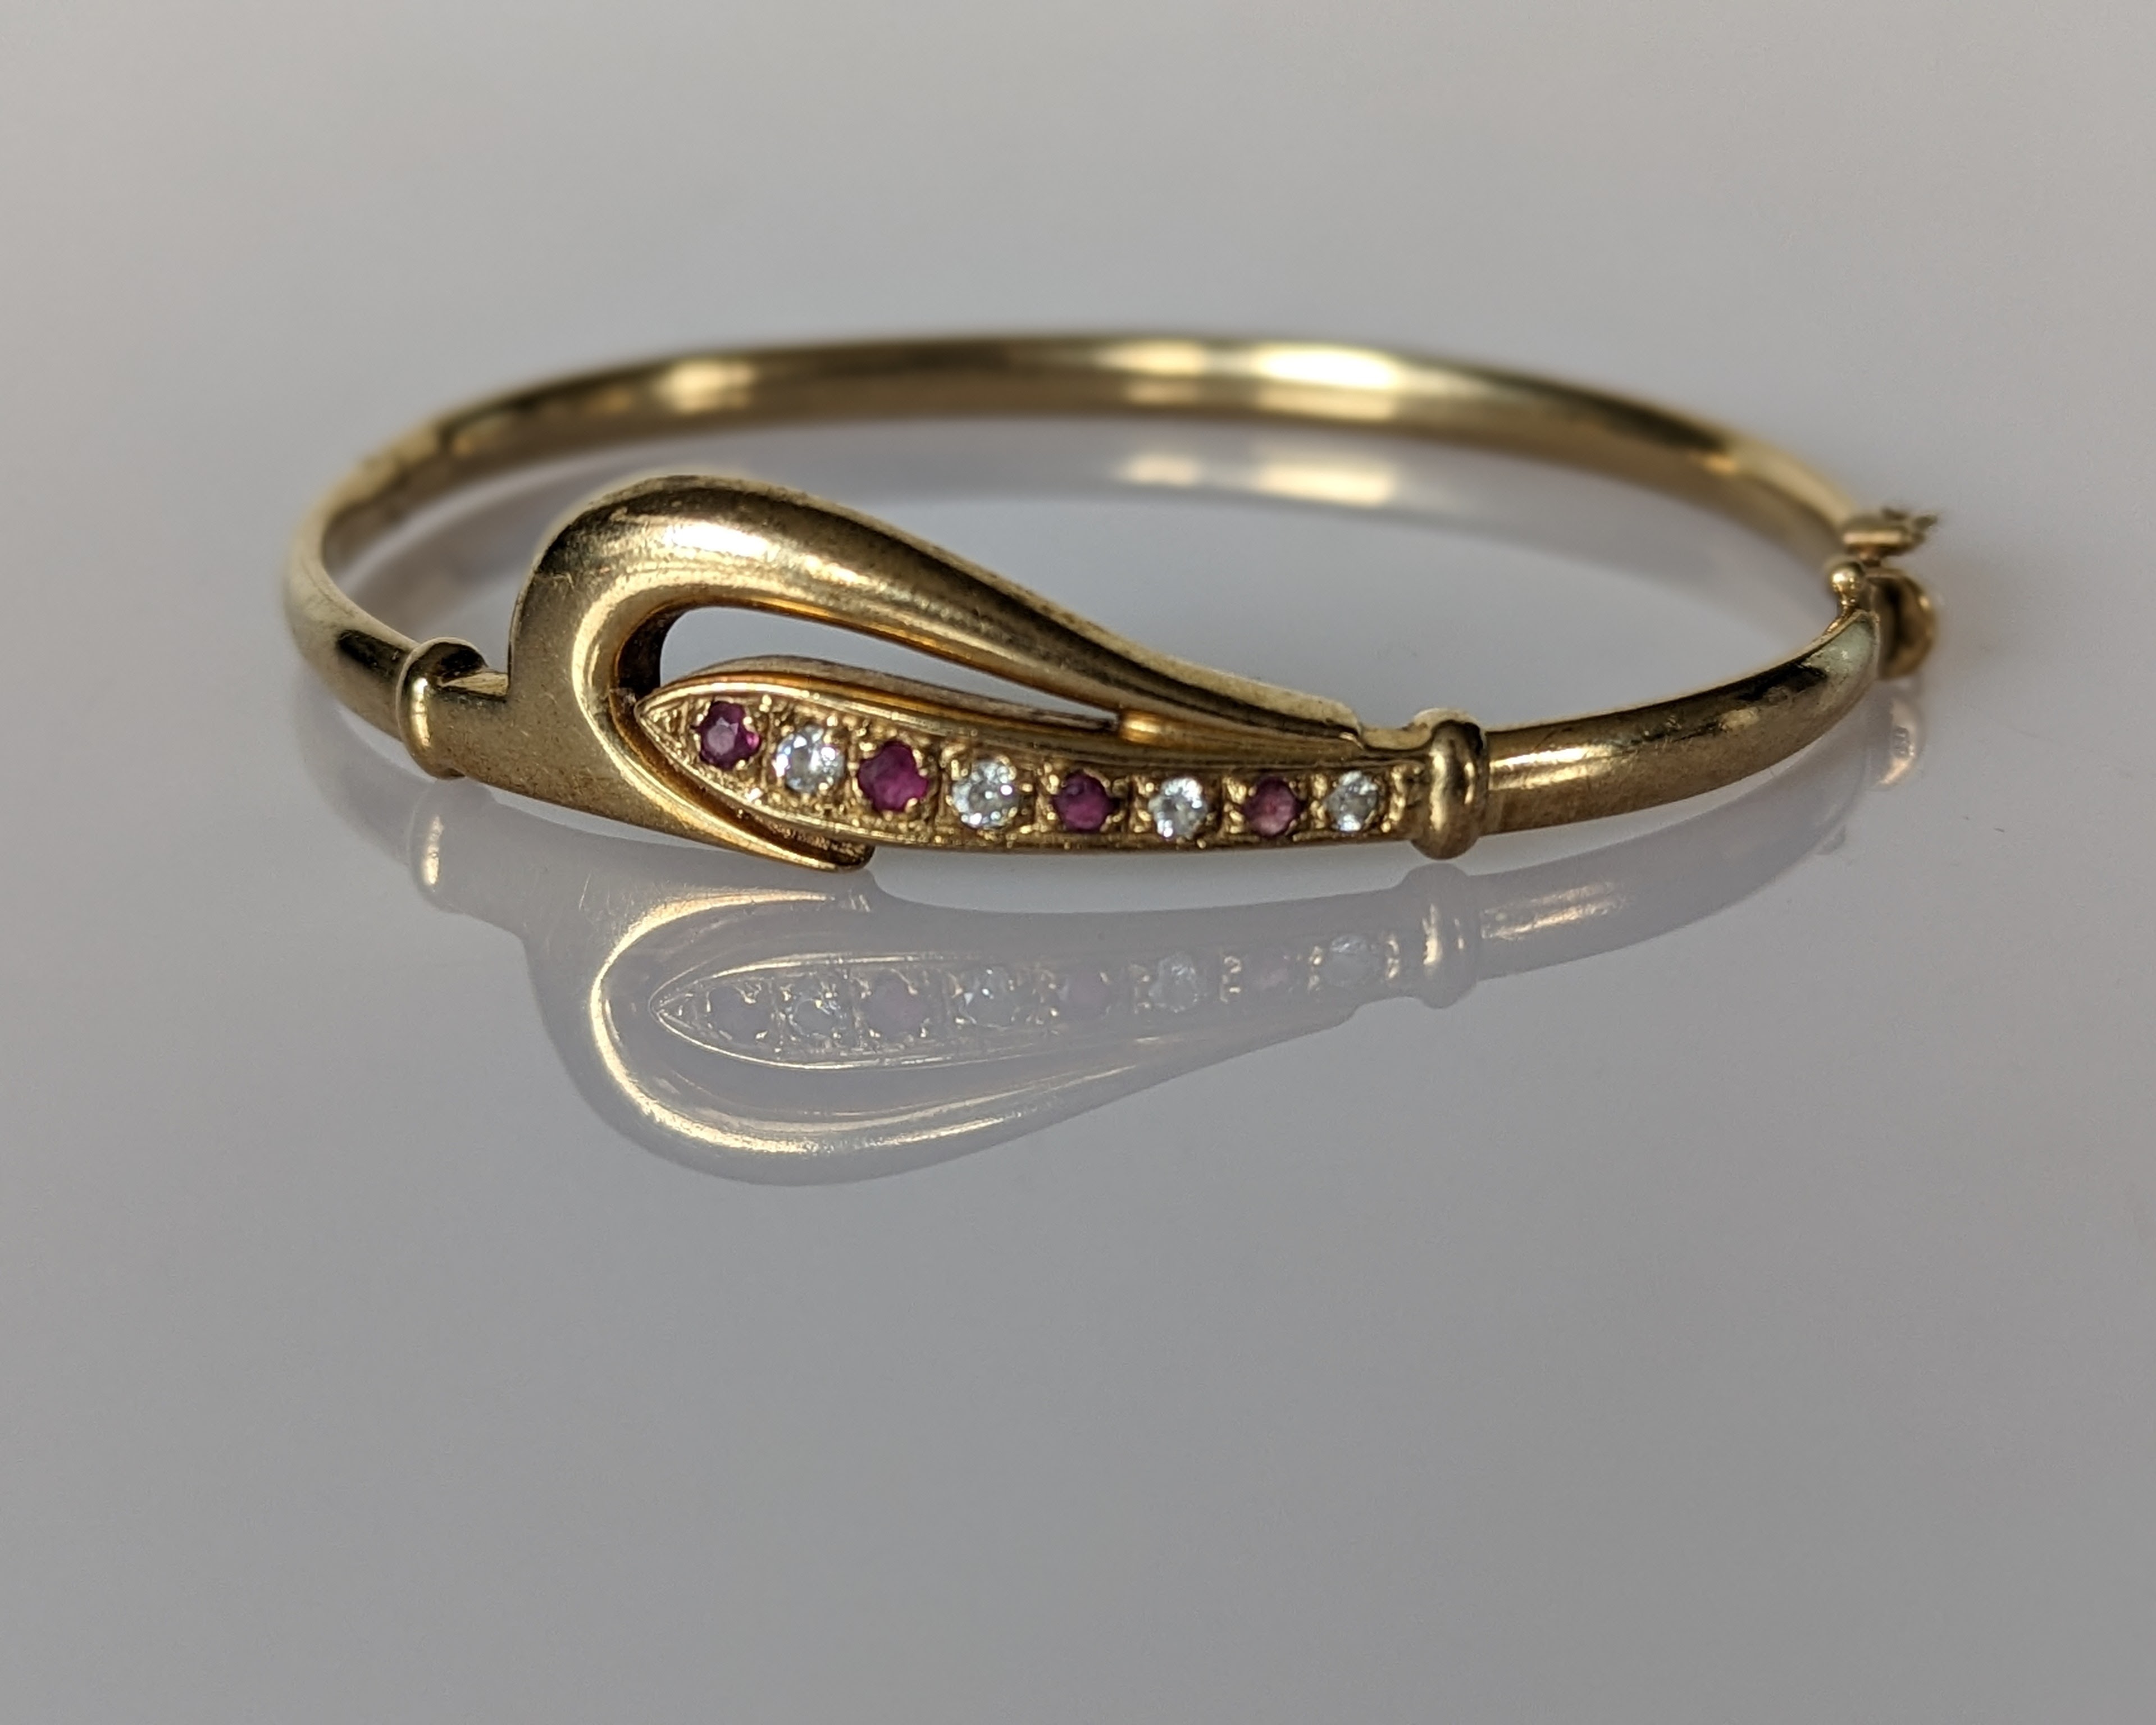 An Etruscan-style gold hinged bangle with sapphire and seed pearl decoration, stamped 9ct - Image 3 of 4